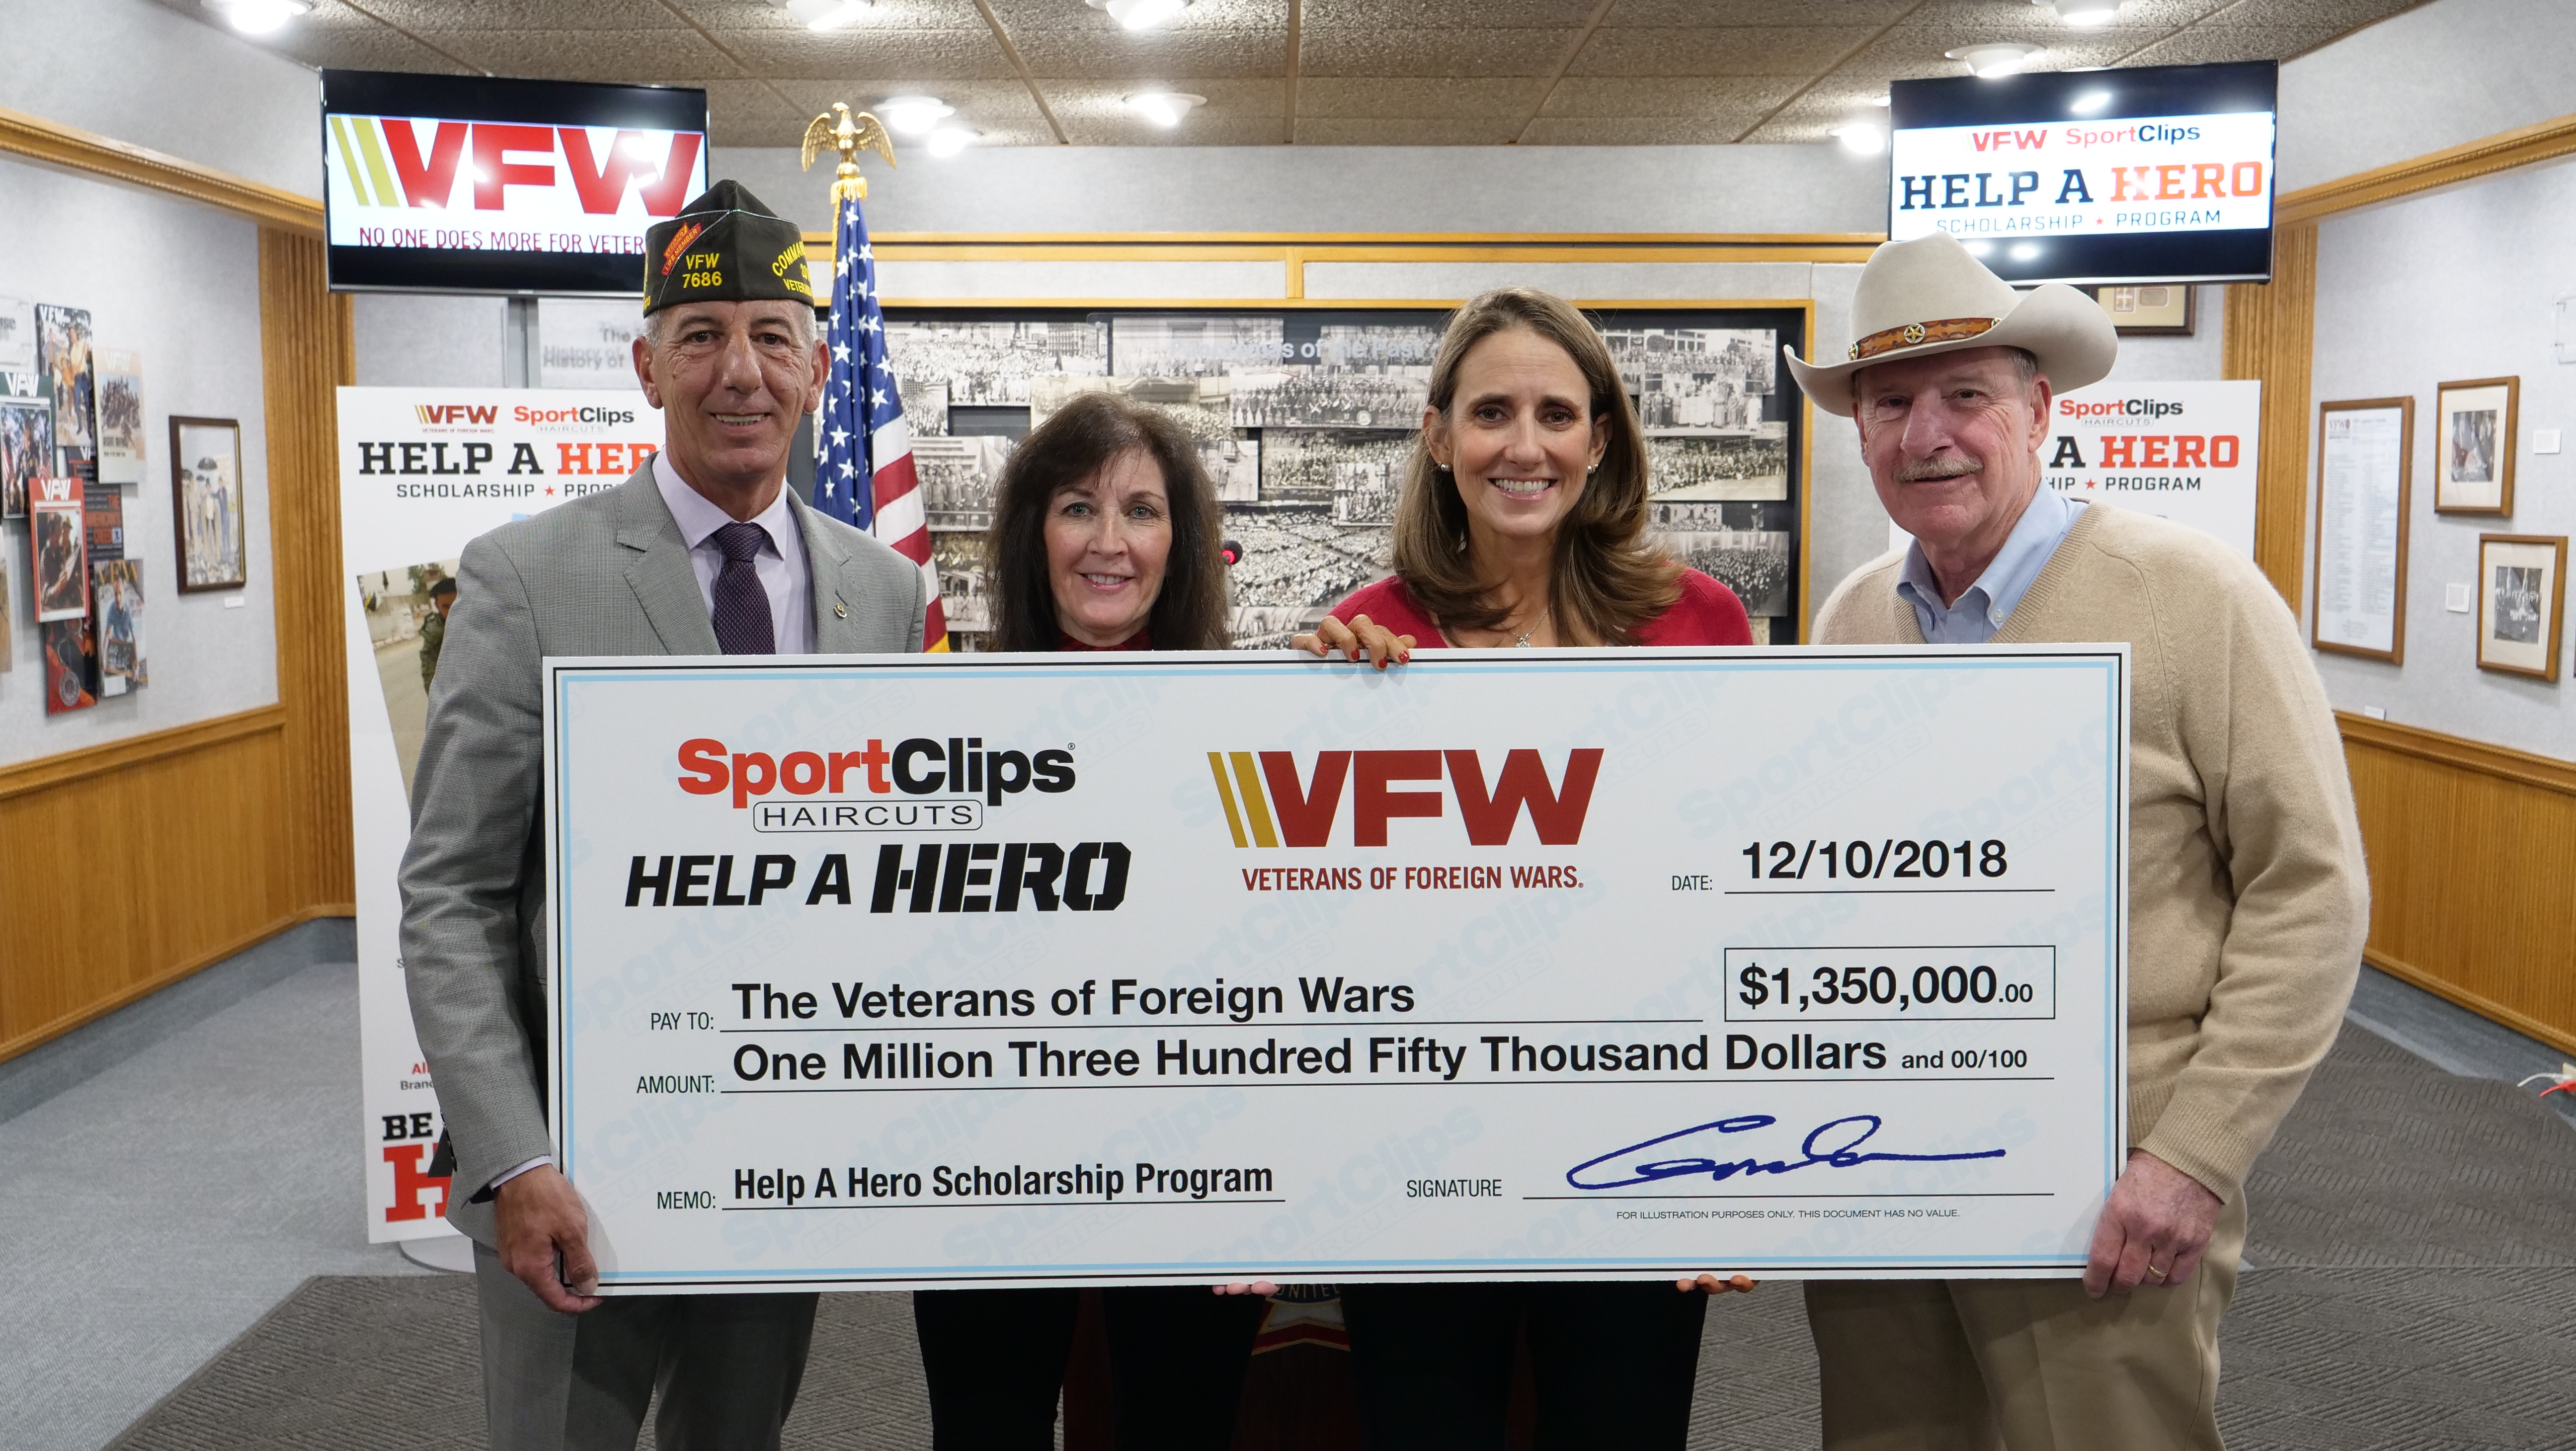 Sport Clips and the VFW raise $1.35 million for Help a Hero scholarships